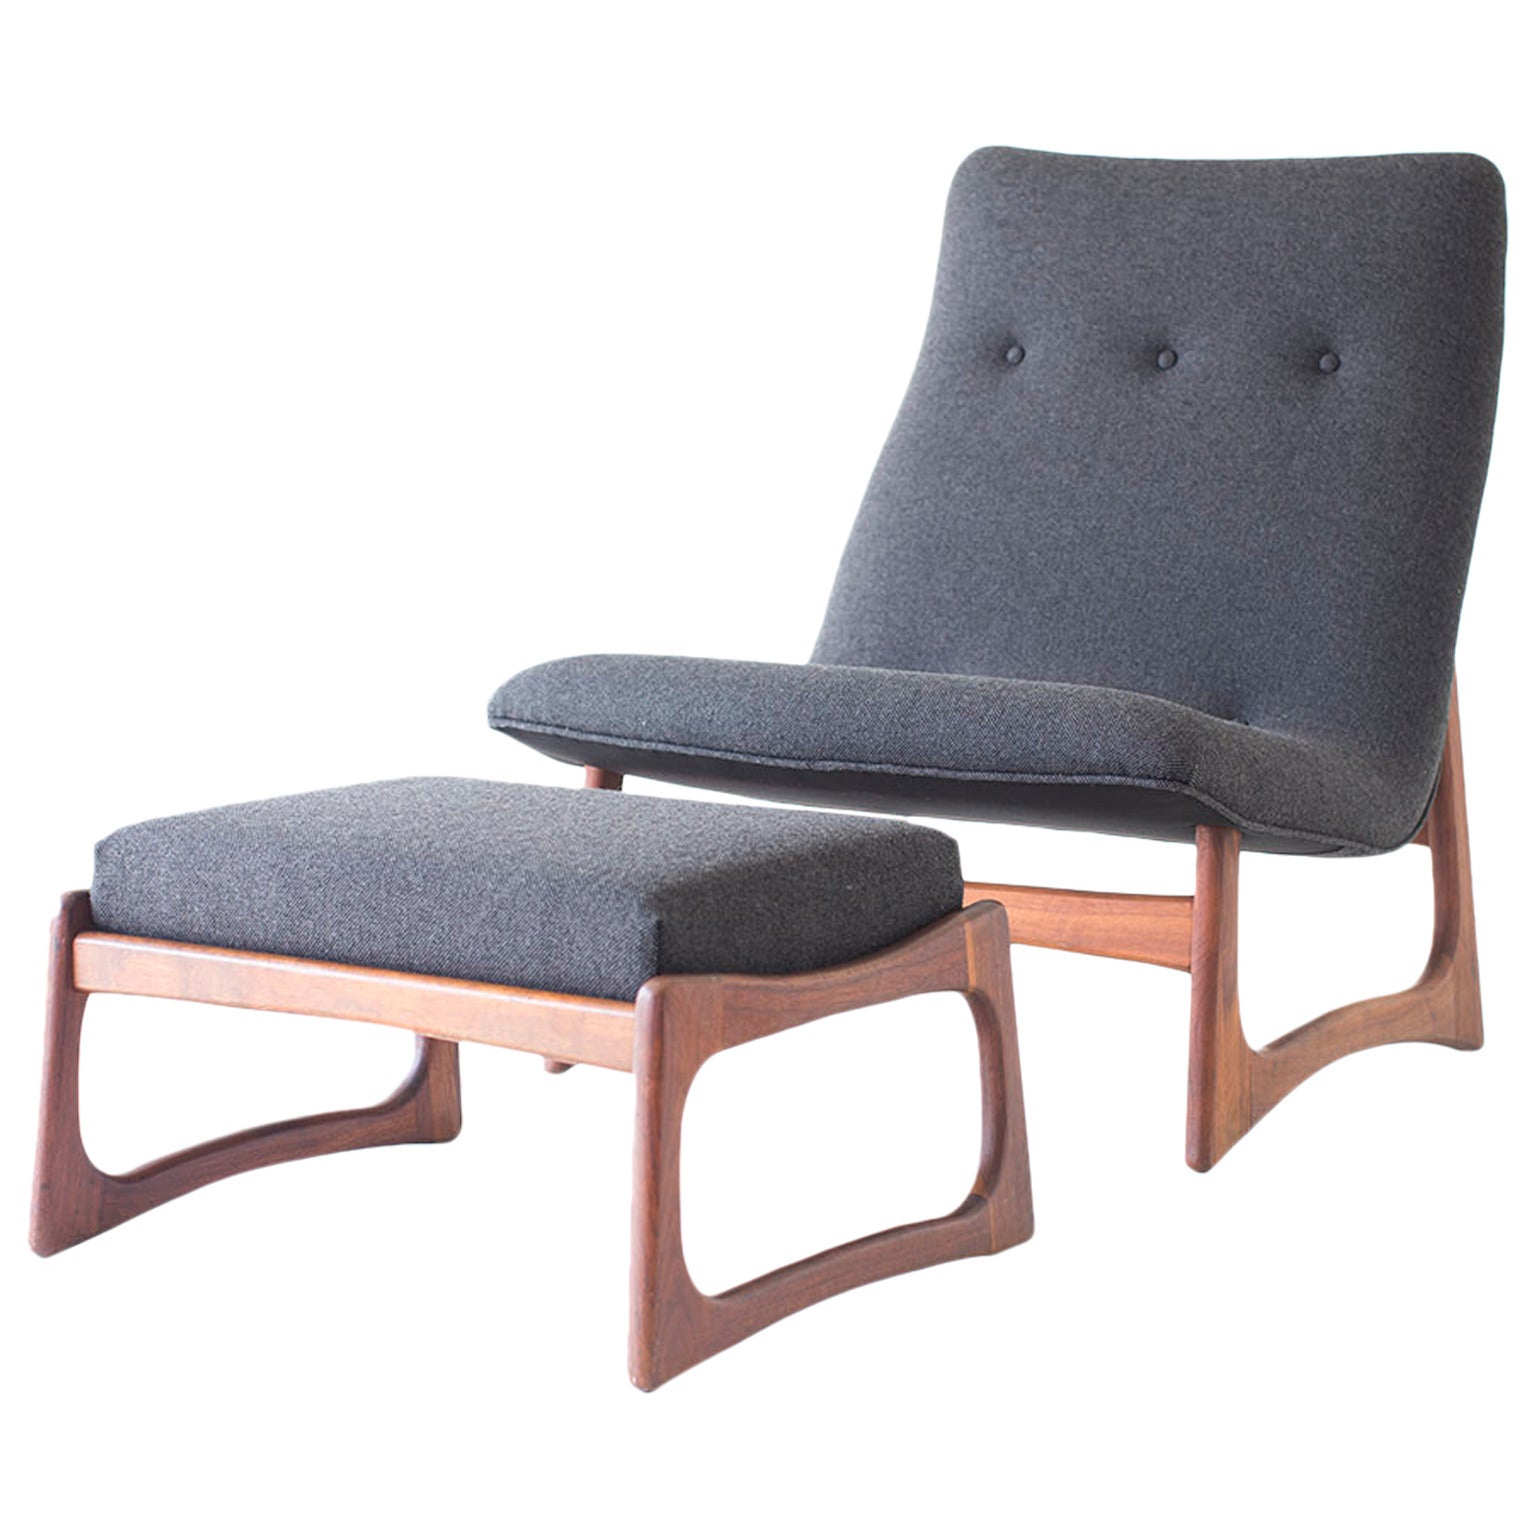 Adrian Pearsall Lounge Chair and Ottoman for Craft Associates